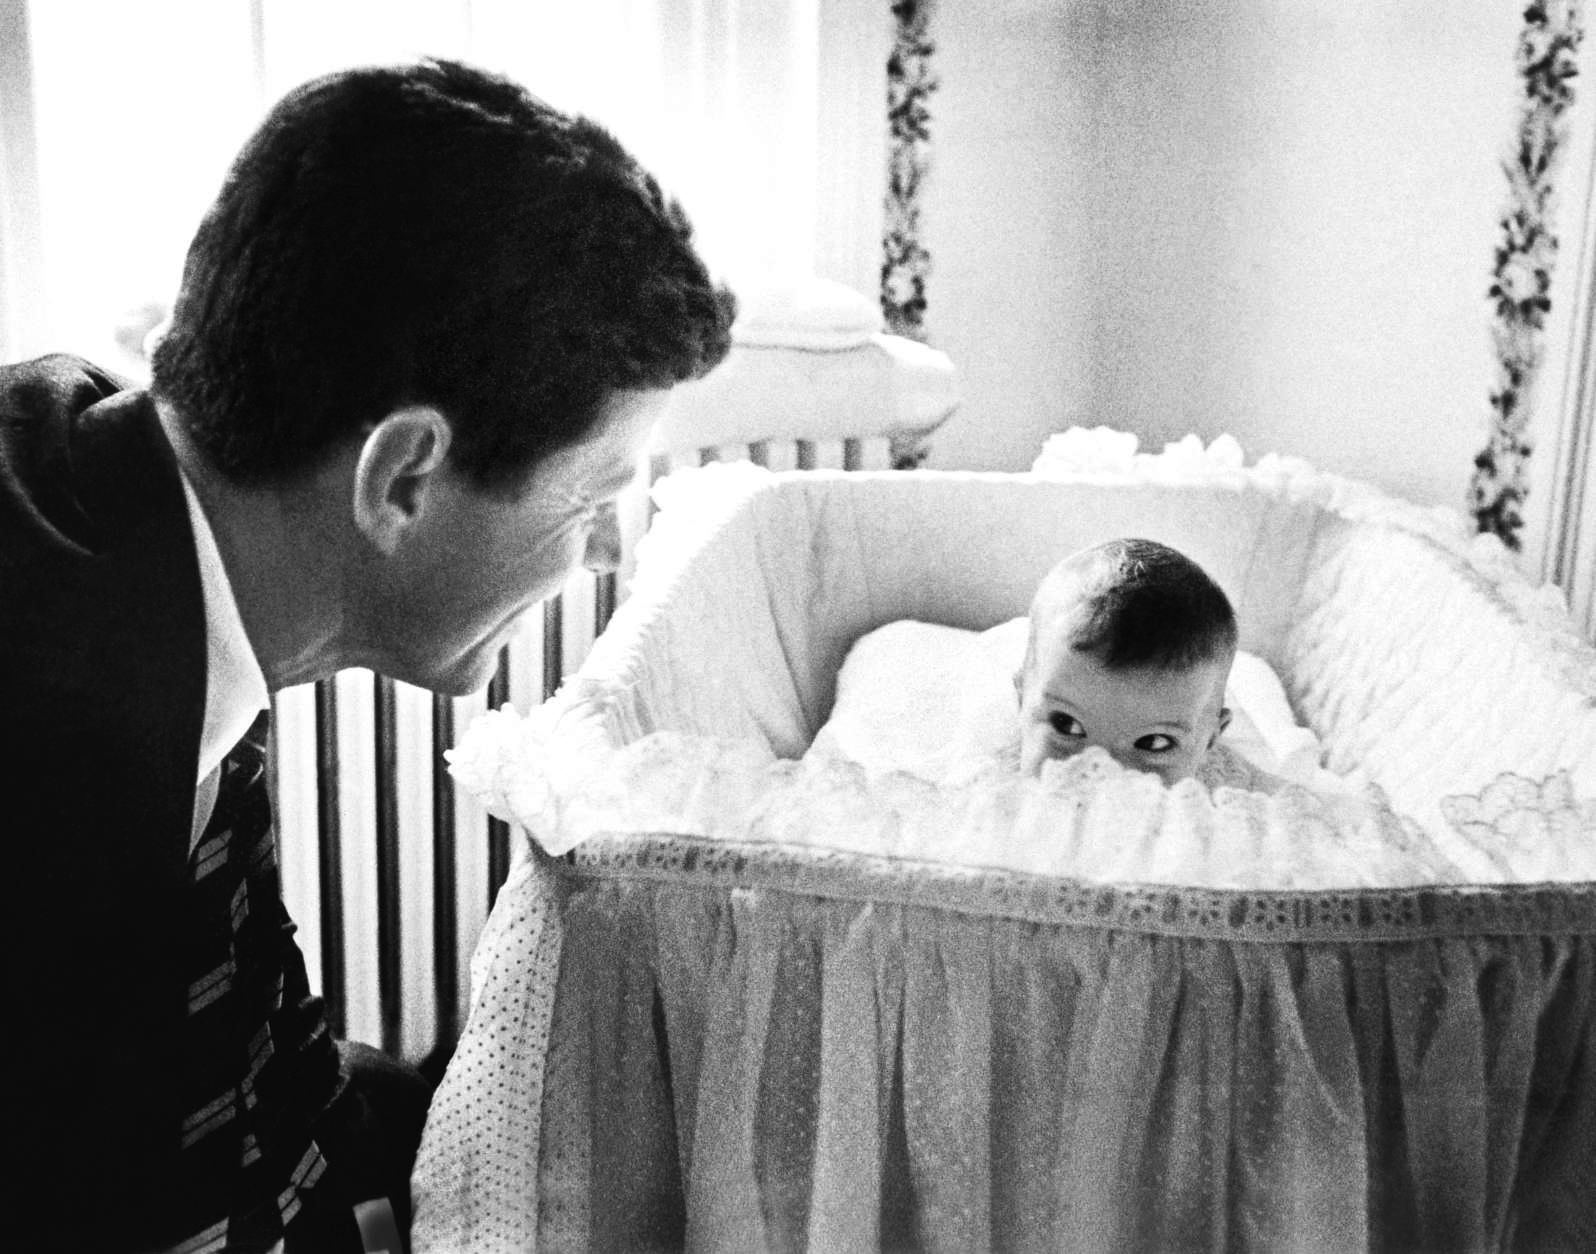 Photo courtesy Smithsonian American Art Museum's "American Visionary" exhibit, running May 3- Sept. 17, 2017: Jack with daughter Caroline, Georgetown, Washington, DC, March 25, 1958. © Ed Clark (Courtesy The LIFE Picture Collection/Getty Images)